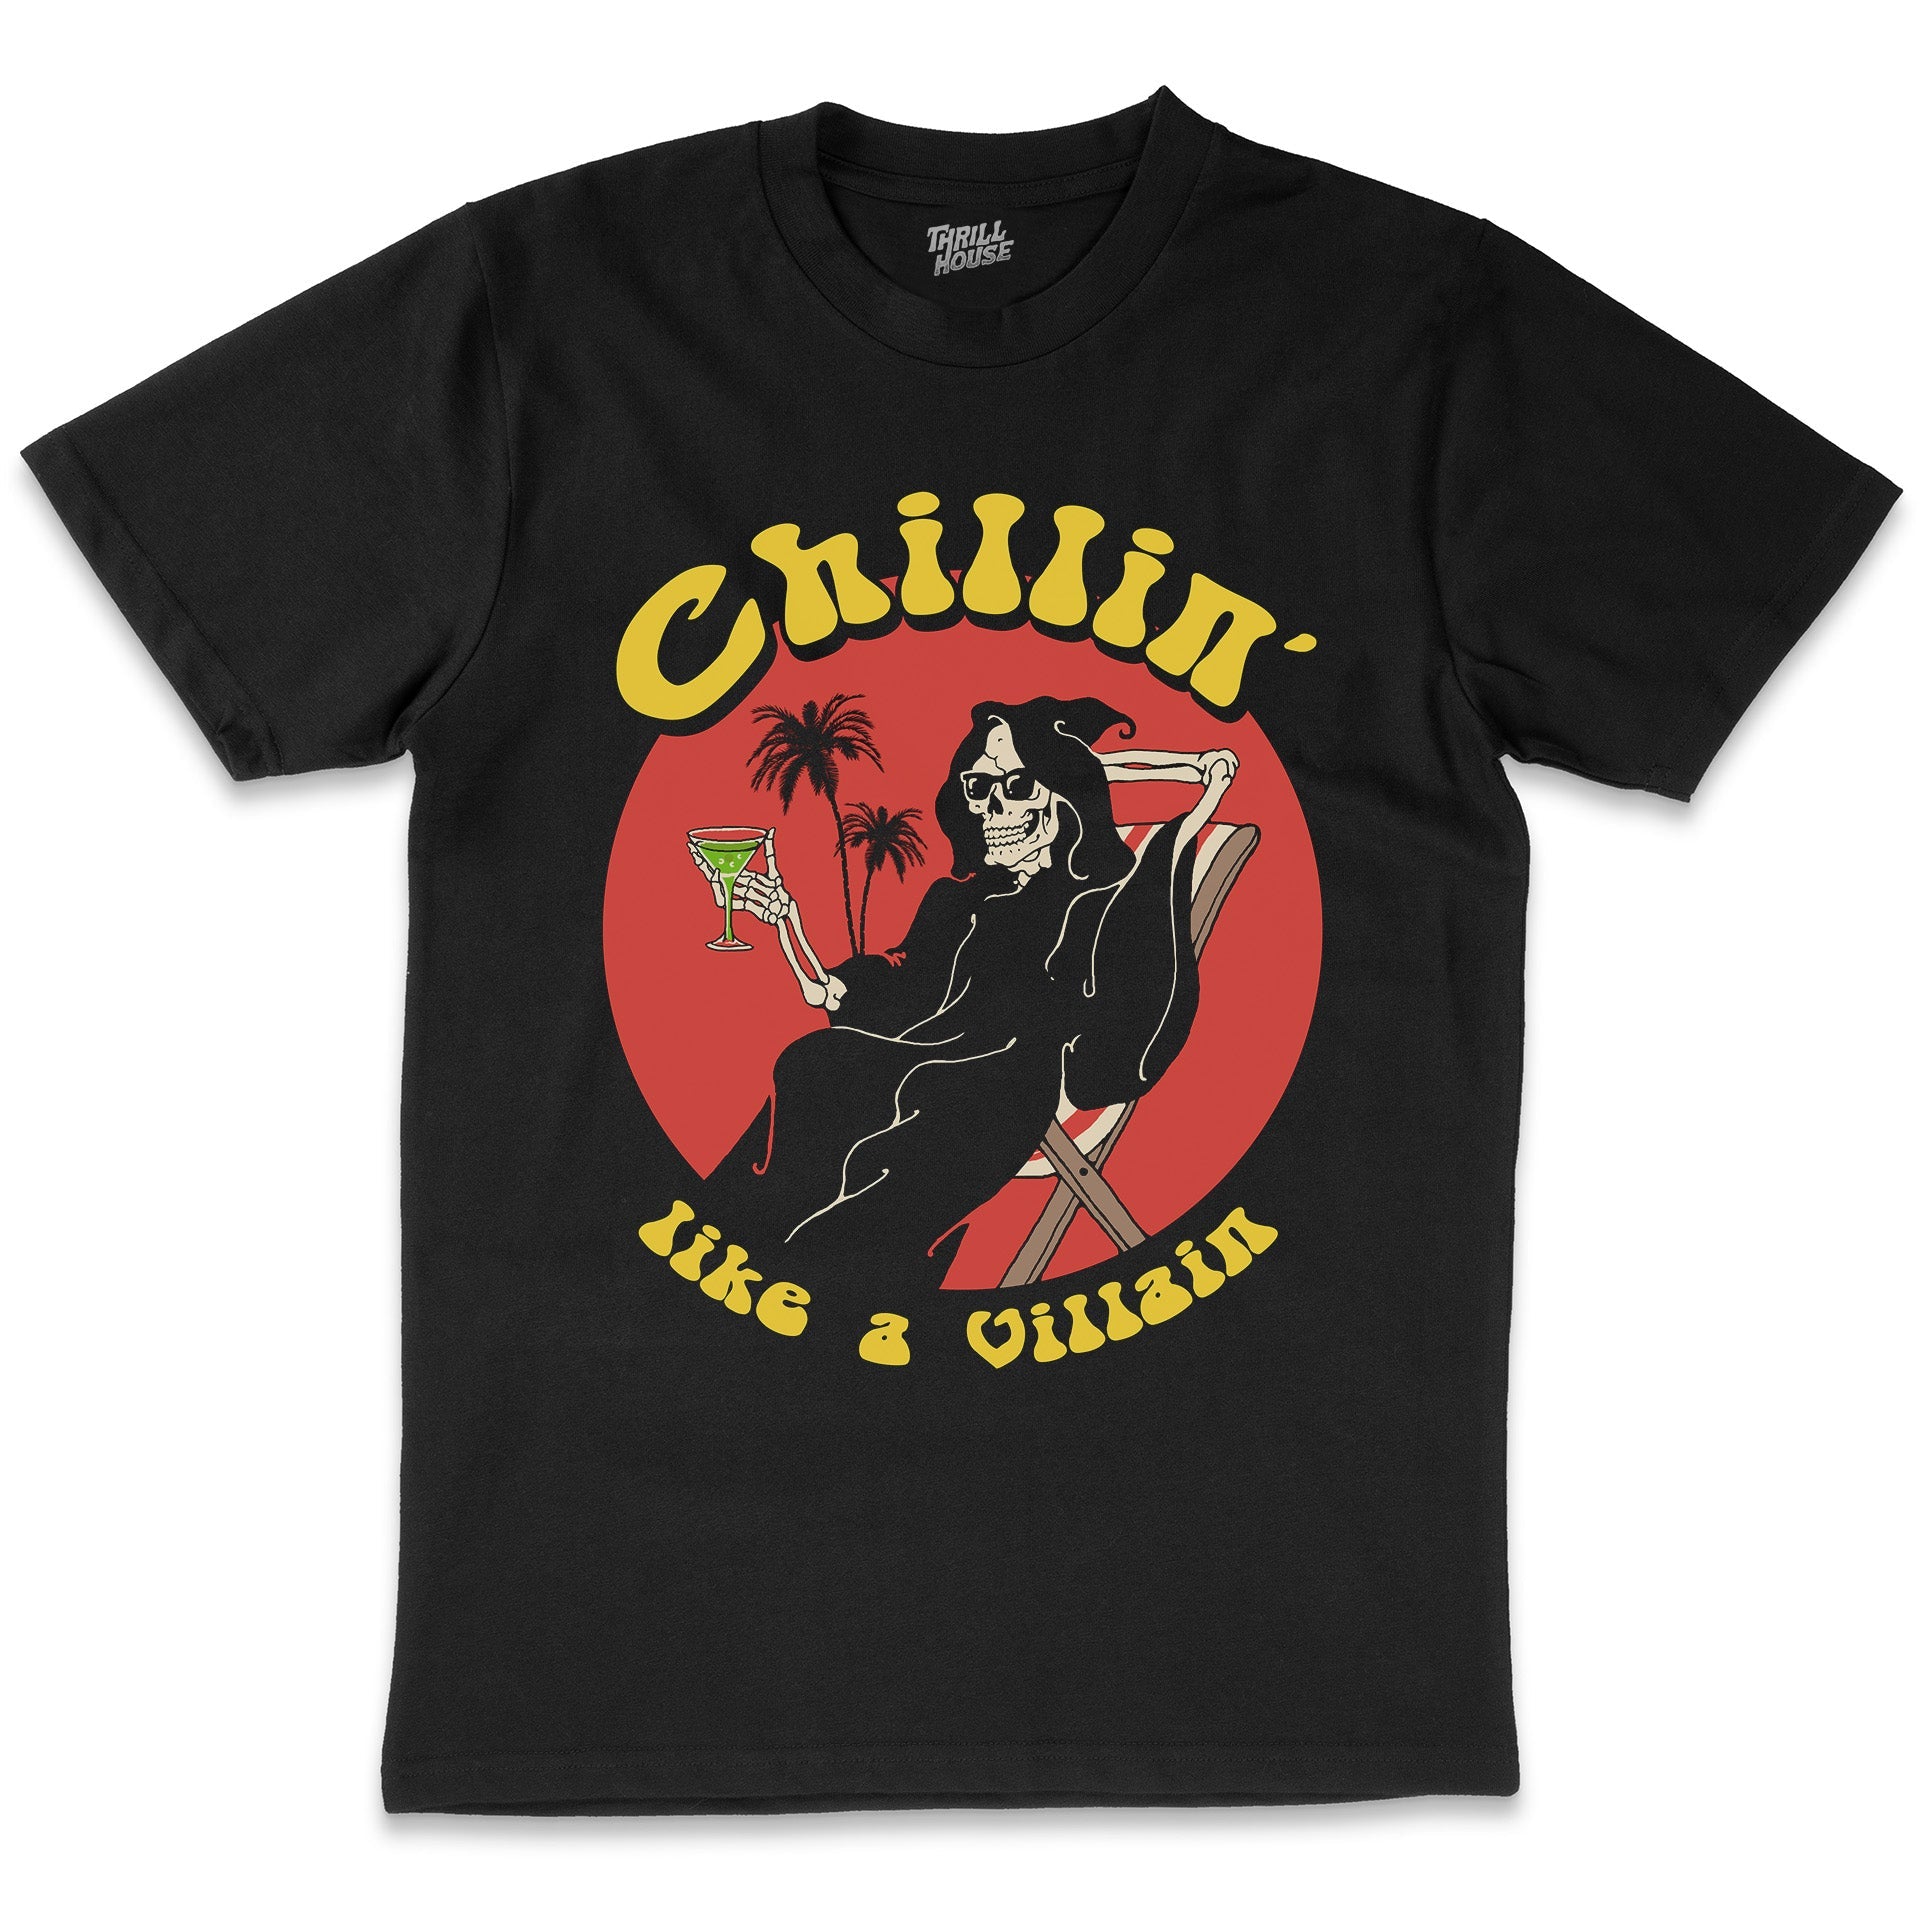 Chillin Like a Villain Funny Slogan Grim Reaper Chill Holiday Vacation Party Dark Humour Cotton  T-Shirt